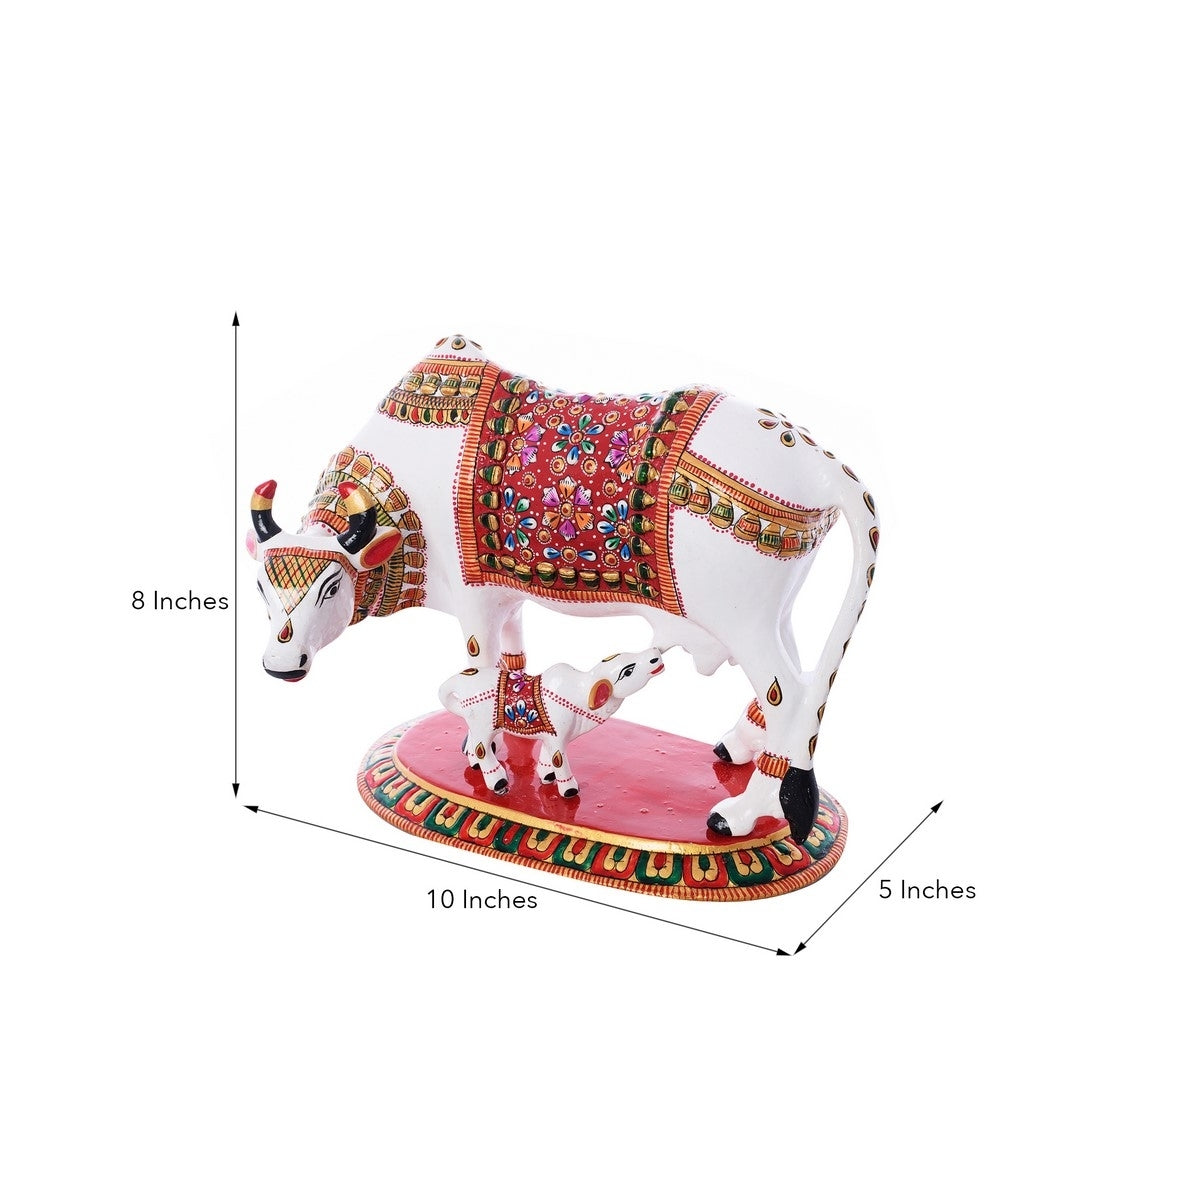 Meenakari Metal Colorful Cow And Calf statue (White, Red and Green) 2